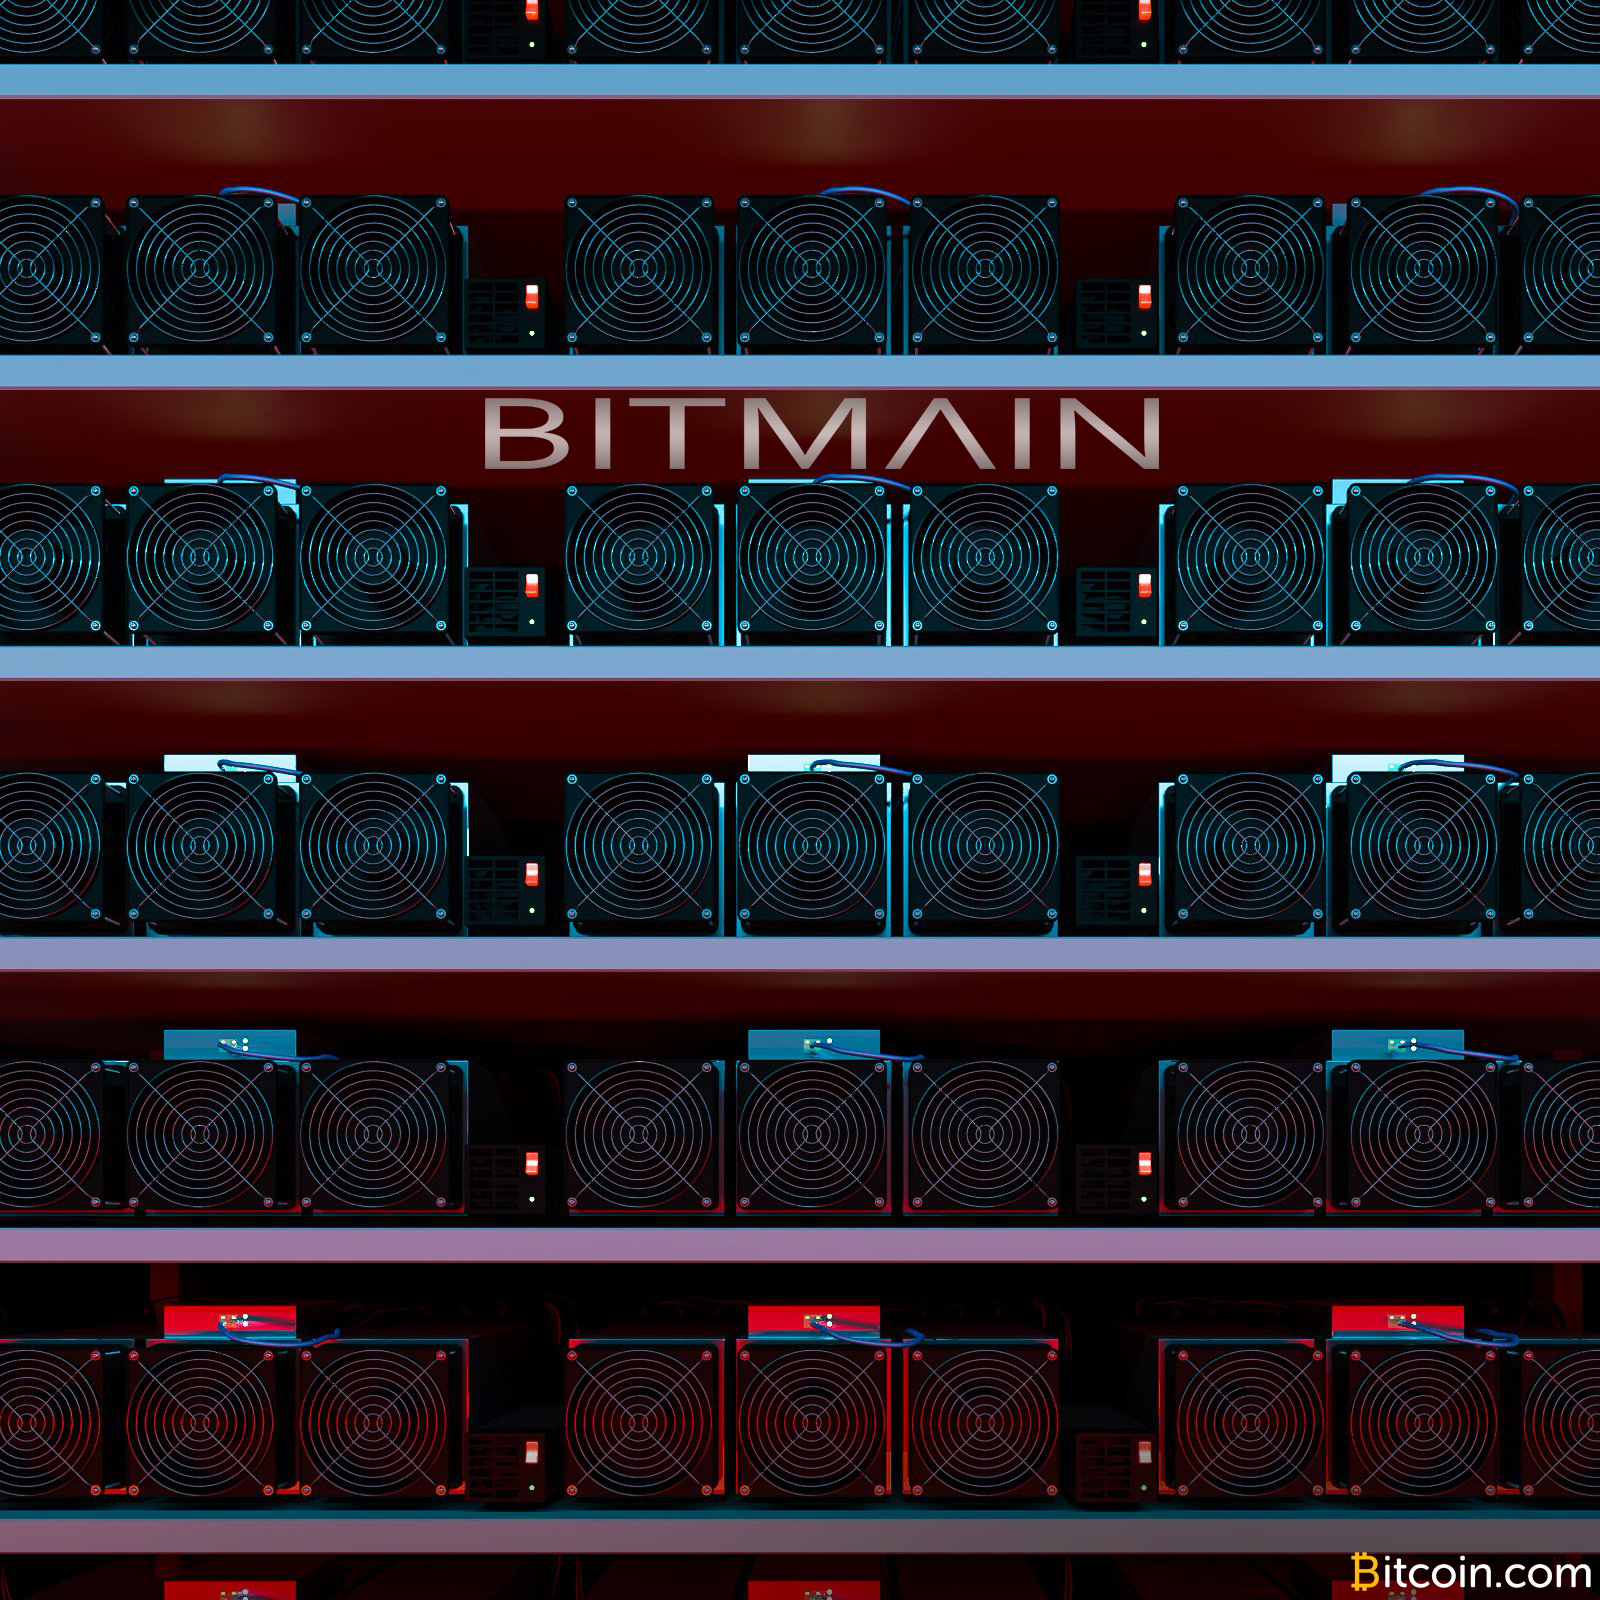 Bitmain Made a Profit of Up To $4 Billion Last Year